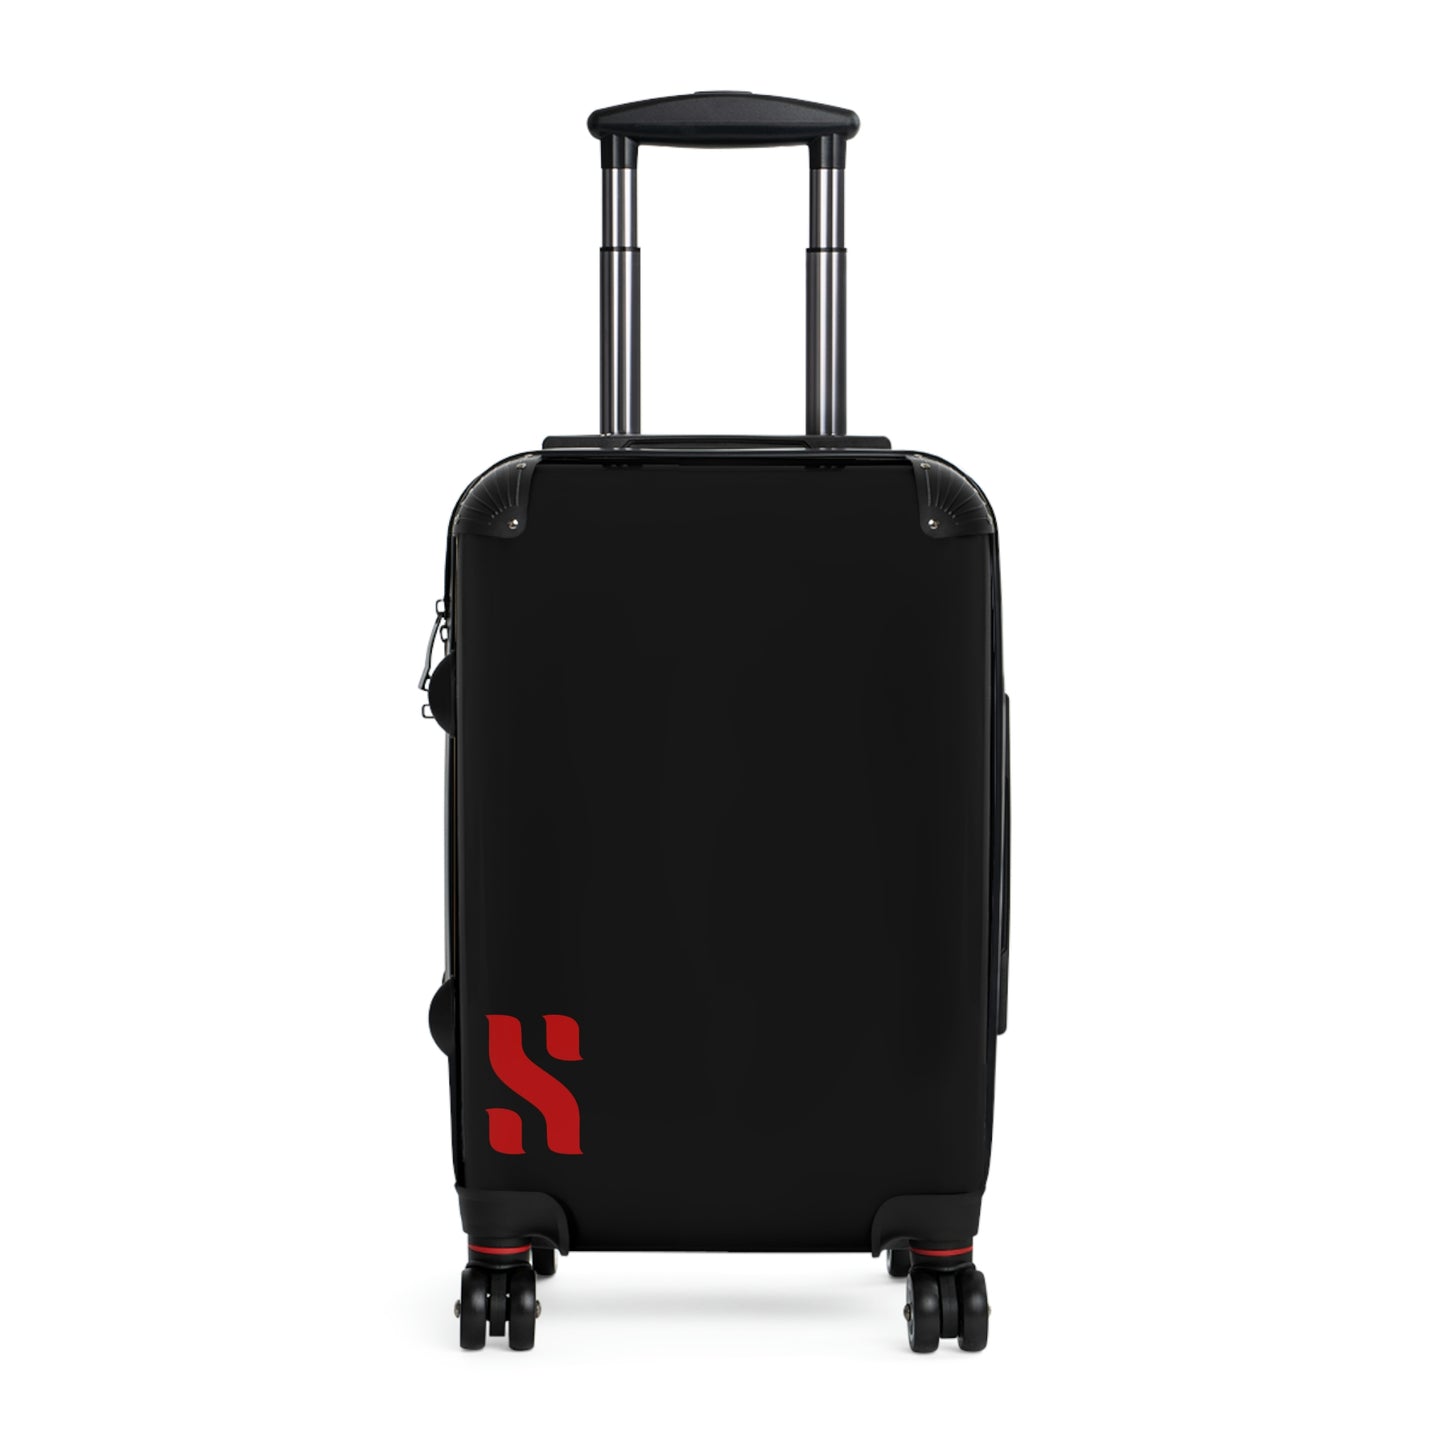 The Nomad Overhead Suitcase